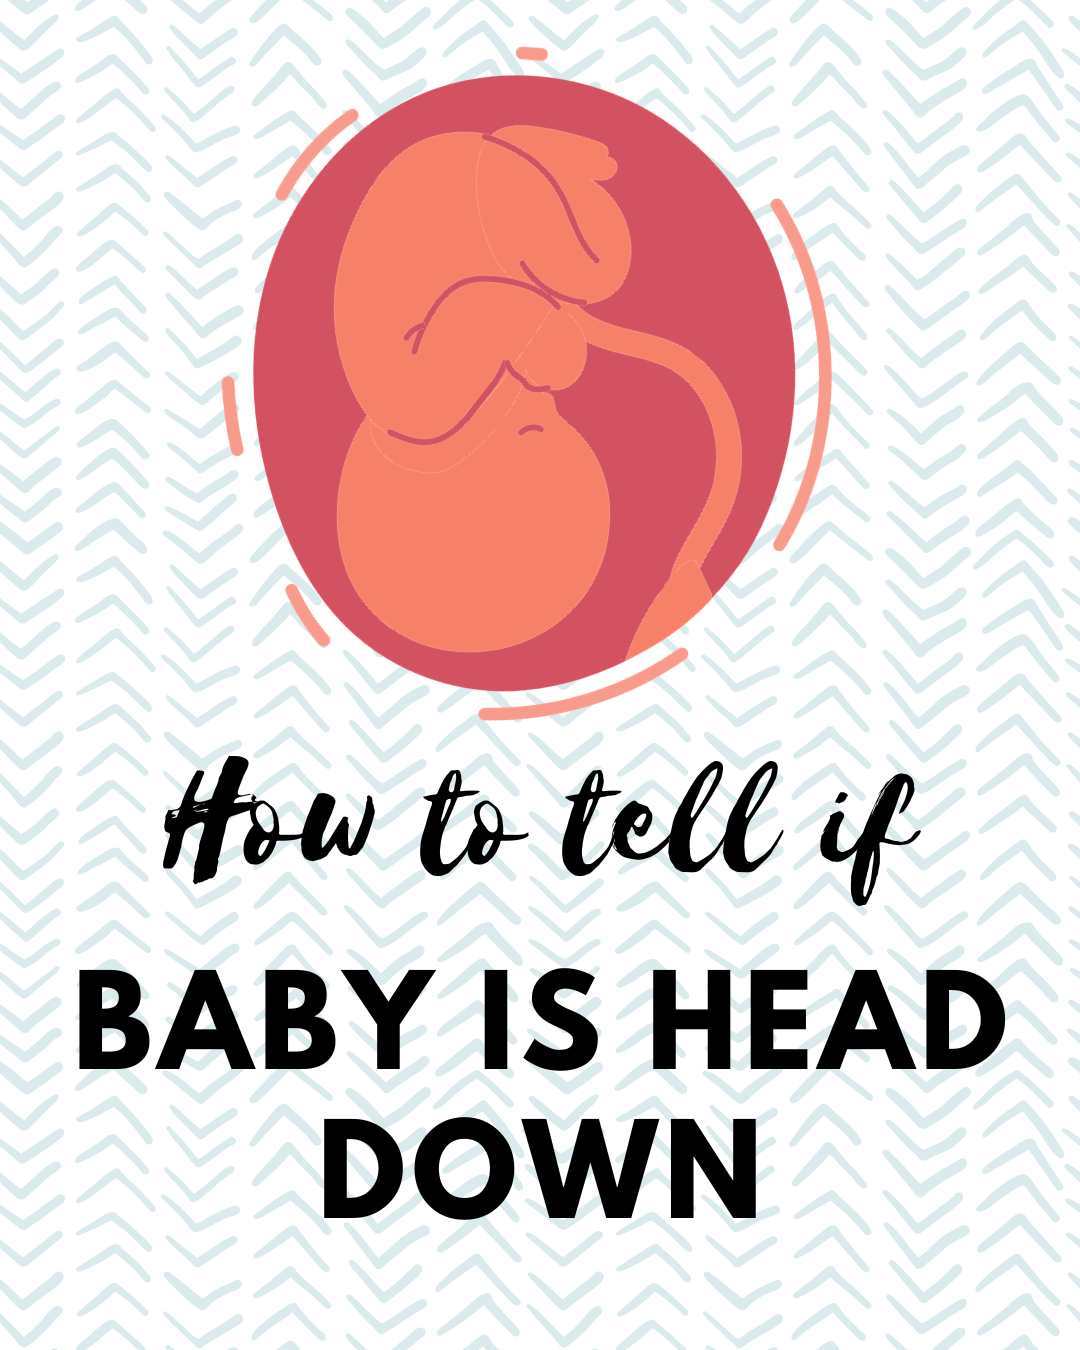 Discover an essential guide to understanding your baby's position in the womb. With 'Unlocking Baby Positions,' unravel the signs that indicate if your little one is head down. An absolute must-read for expecting parents, brimming with invaluable tips to help you prepare for childbirth.